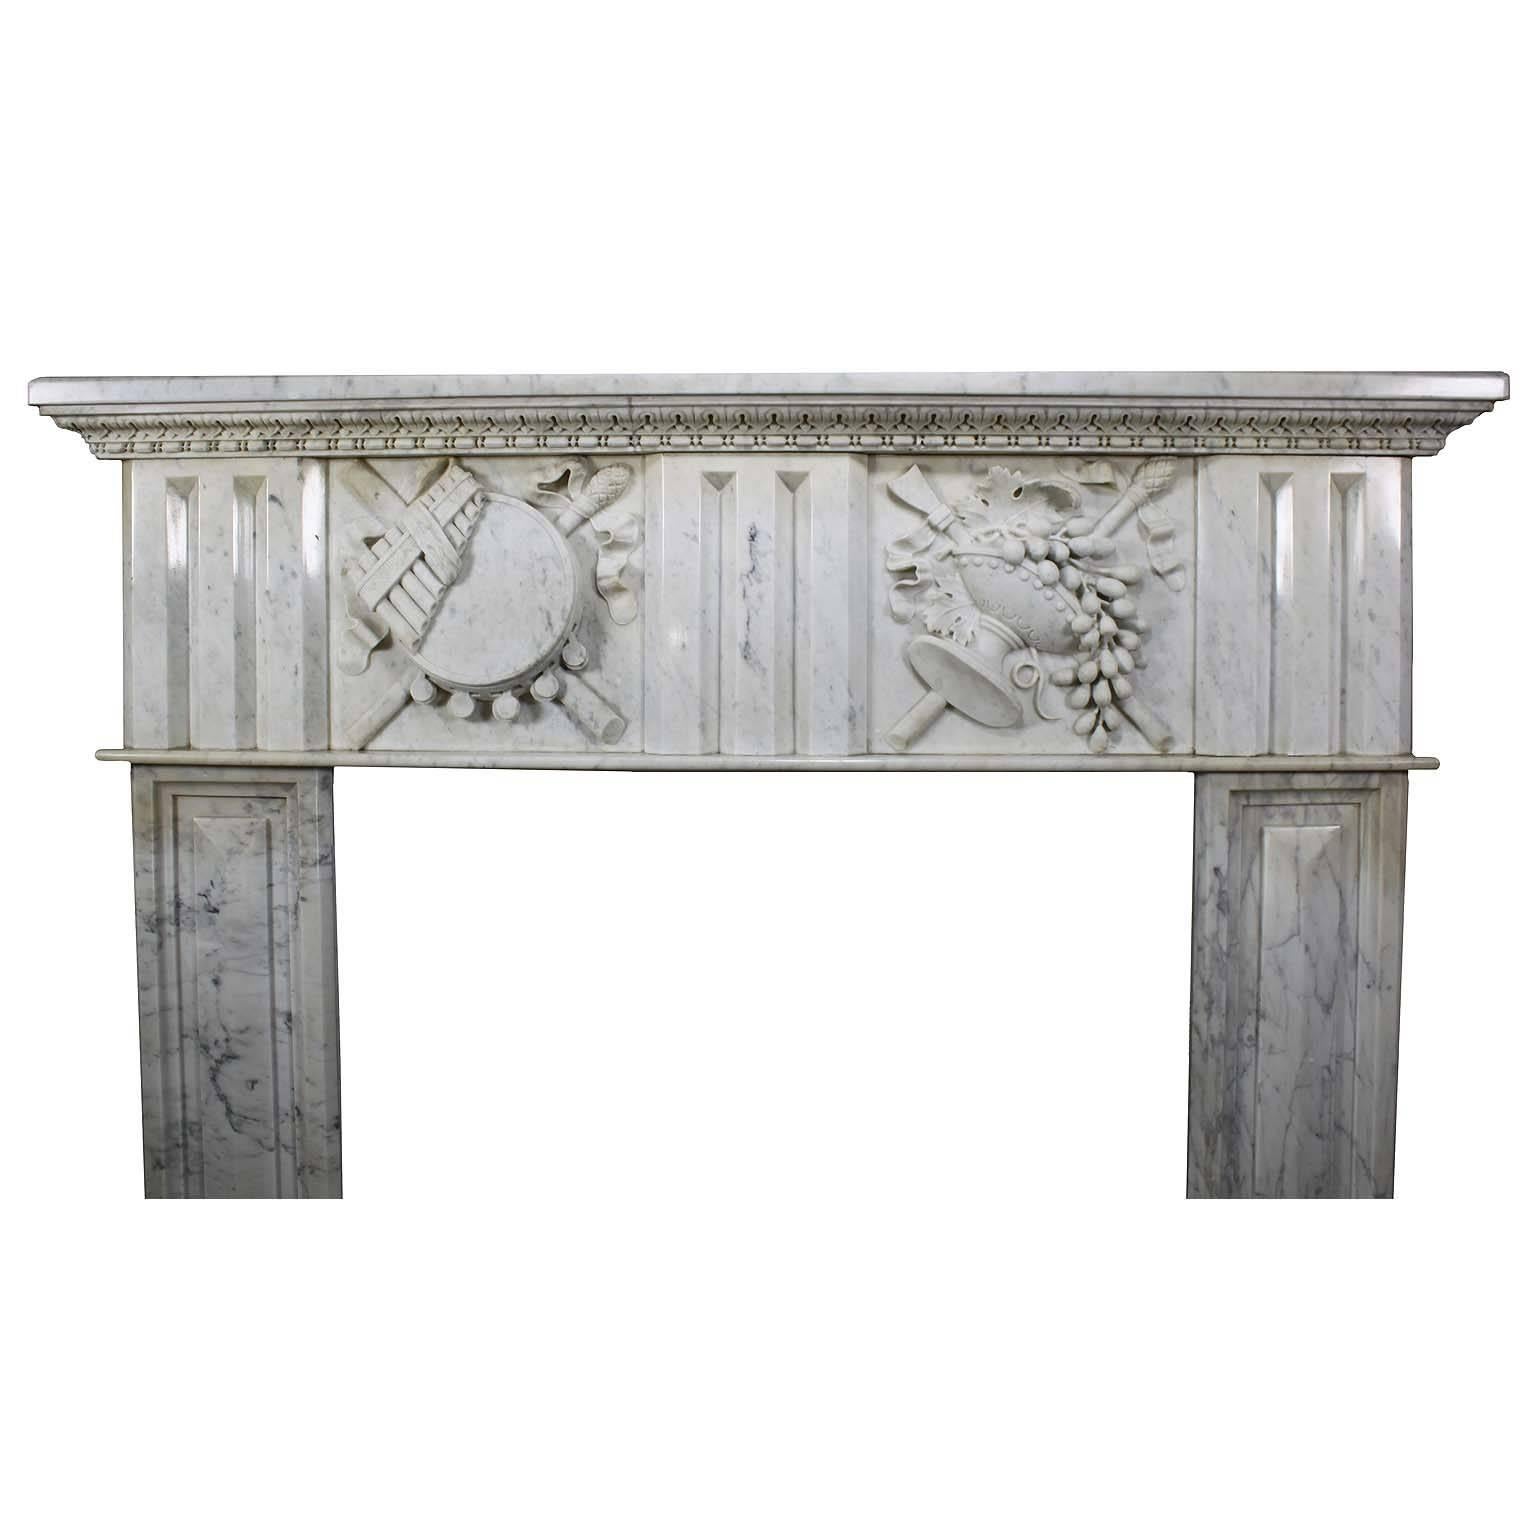 Fine French 19th century Louis XVI style carved white marble fireplace mantel surround. The apron with carvings of musical instruments and allegorical to abundance with fruits and ribbons within an urn, Paris, circa 1880.

Measures: Height 53 3/4